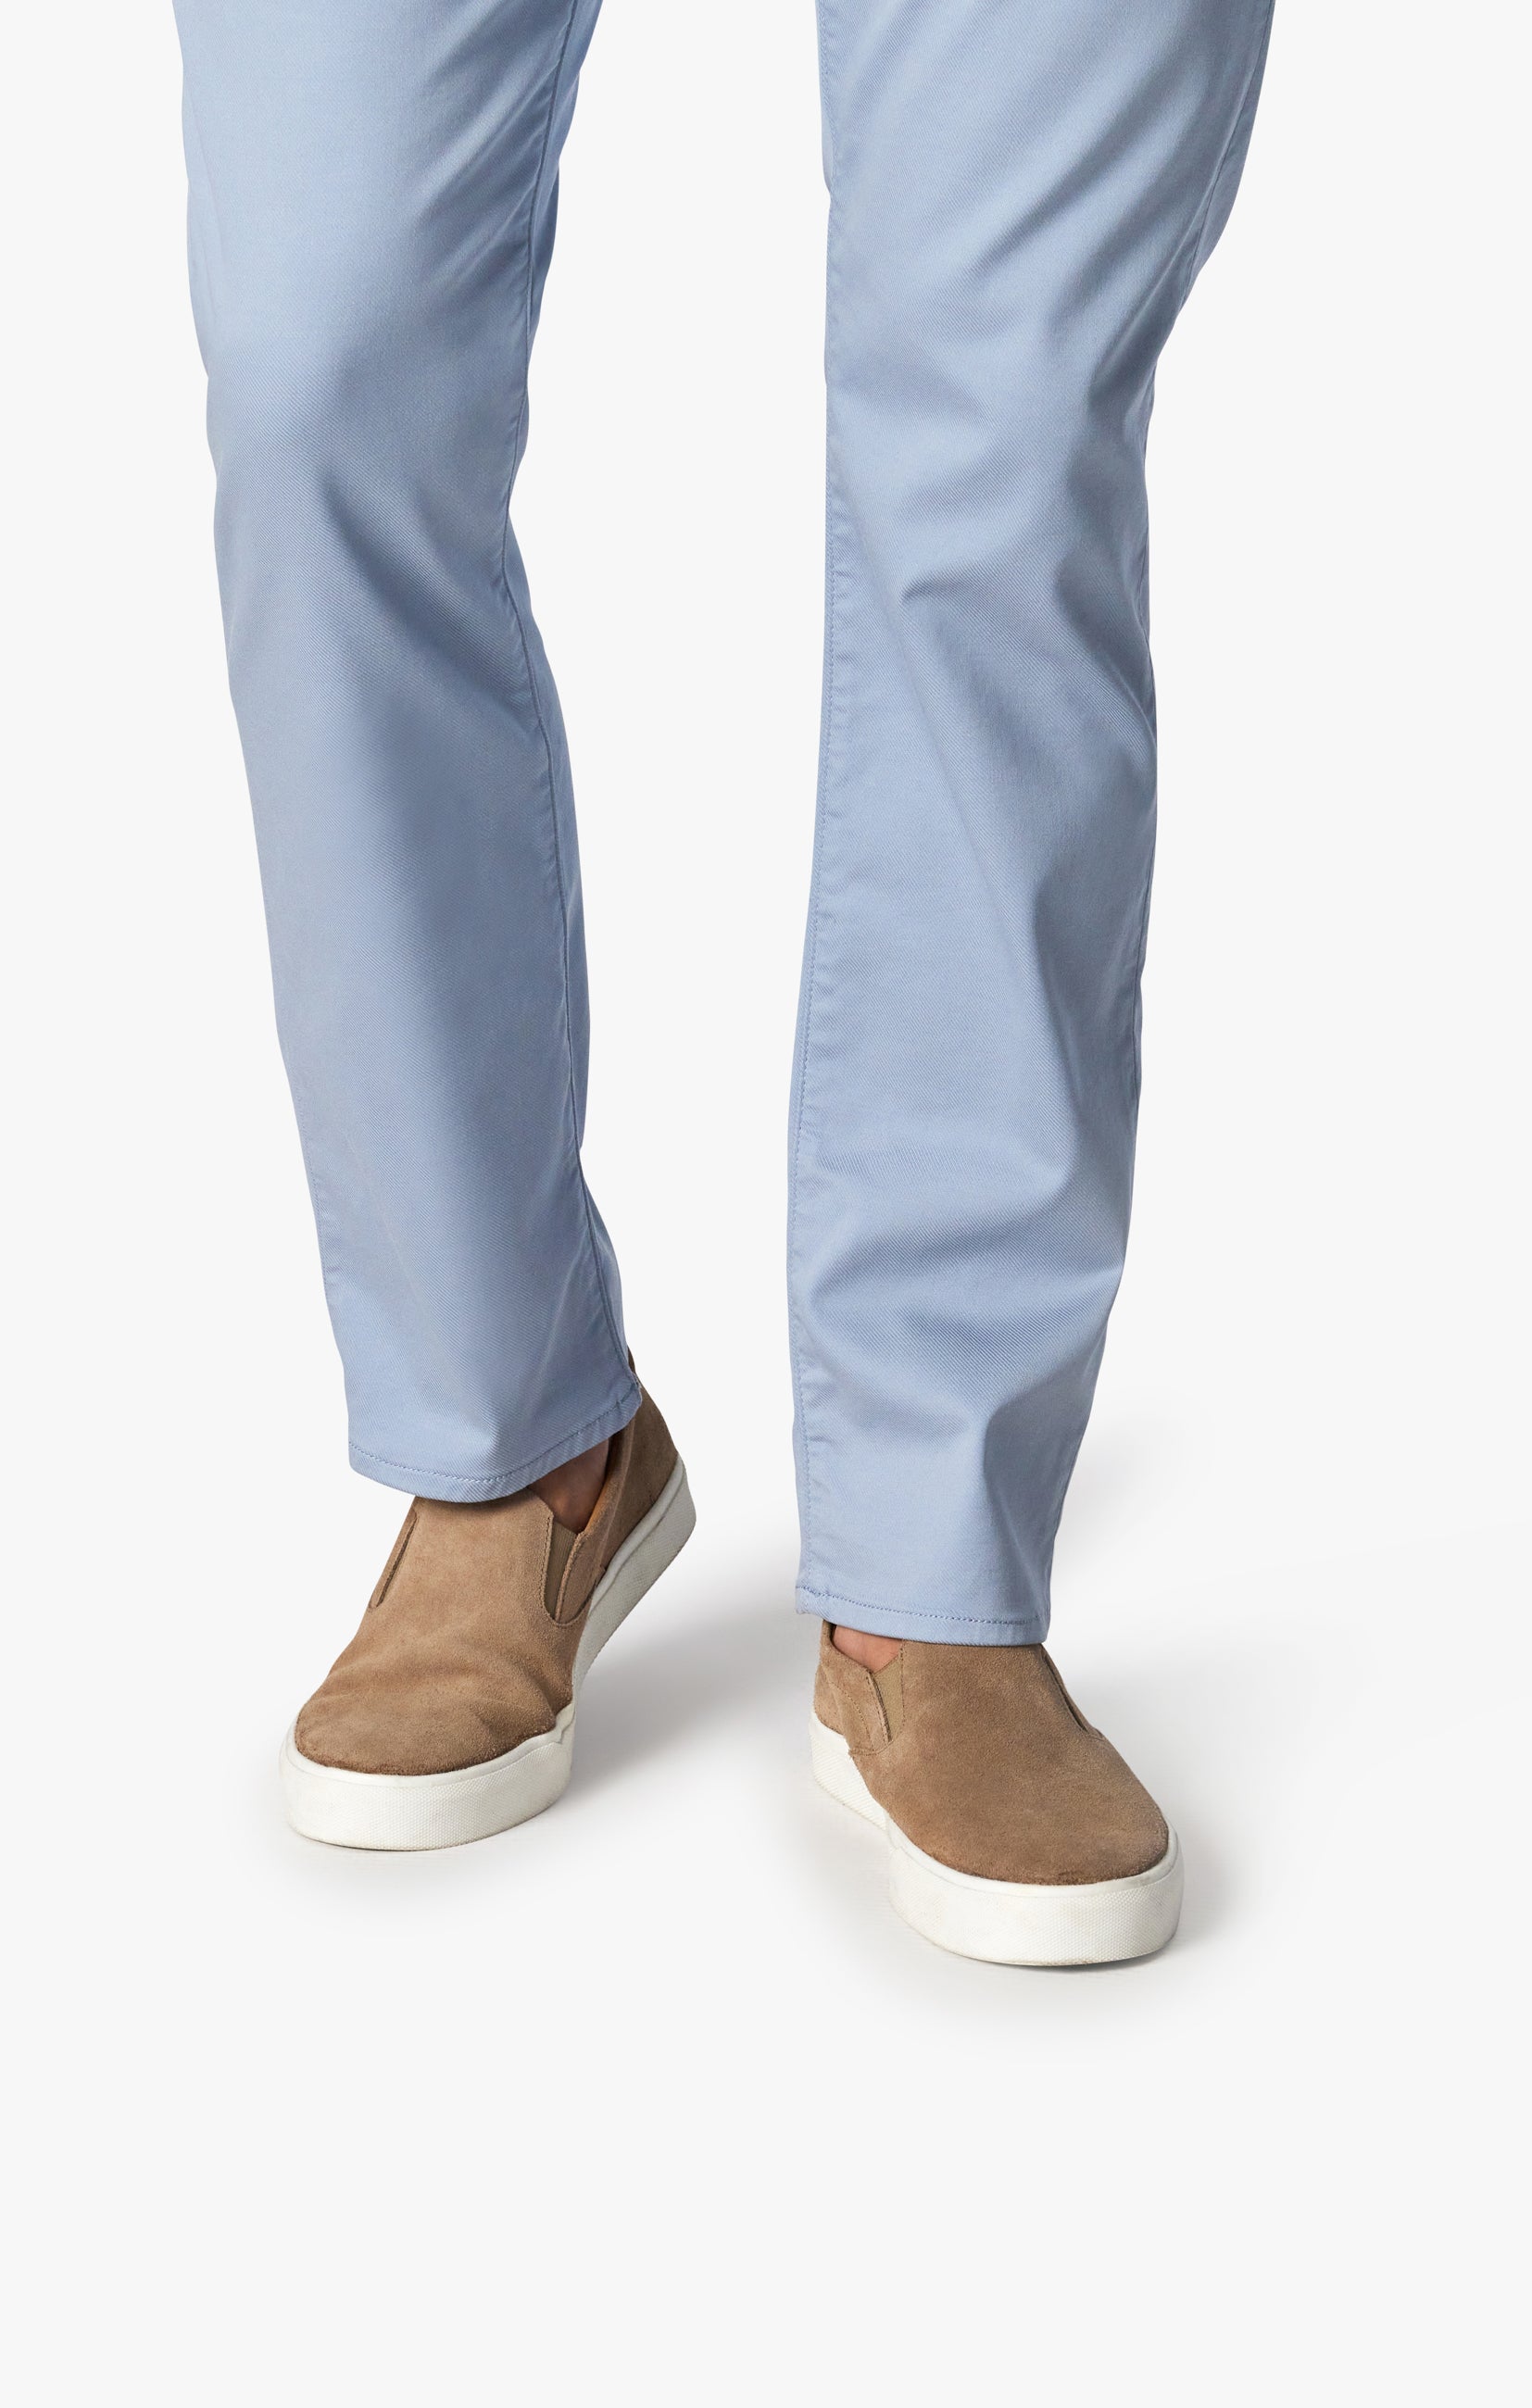 Courage Straight Leg Pants In French Blue Summer Coolmax Image 4